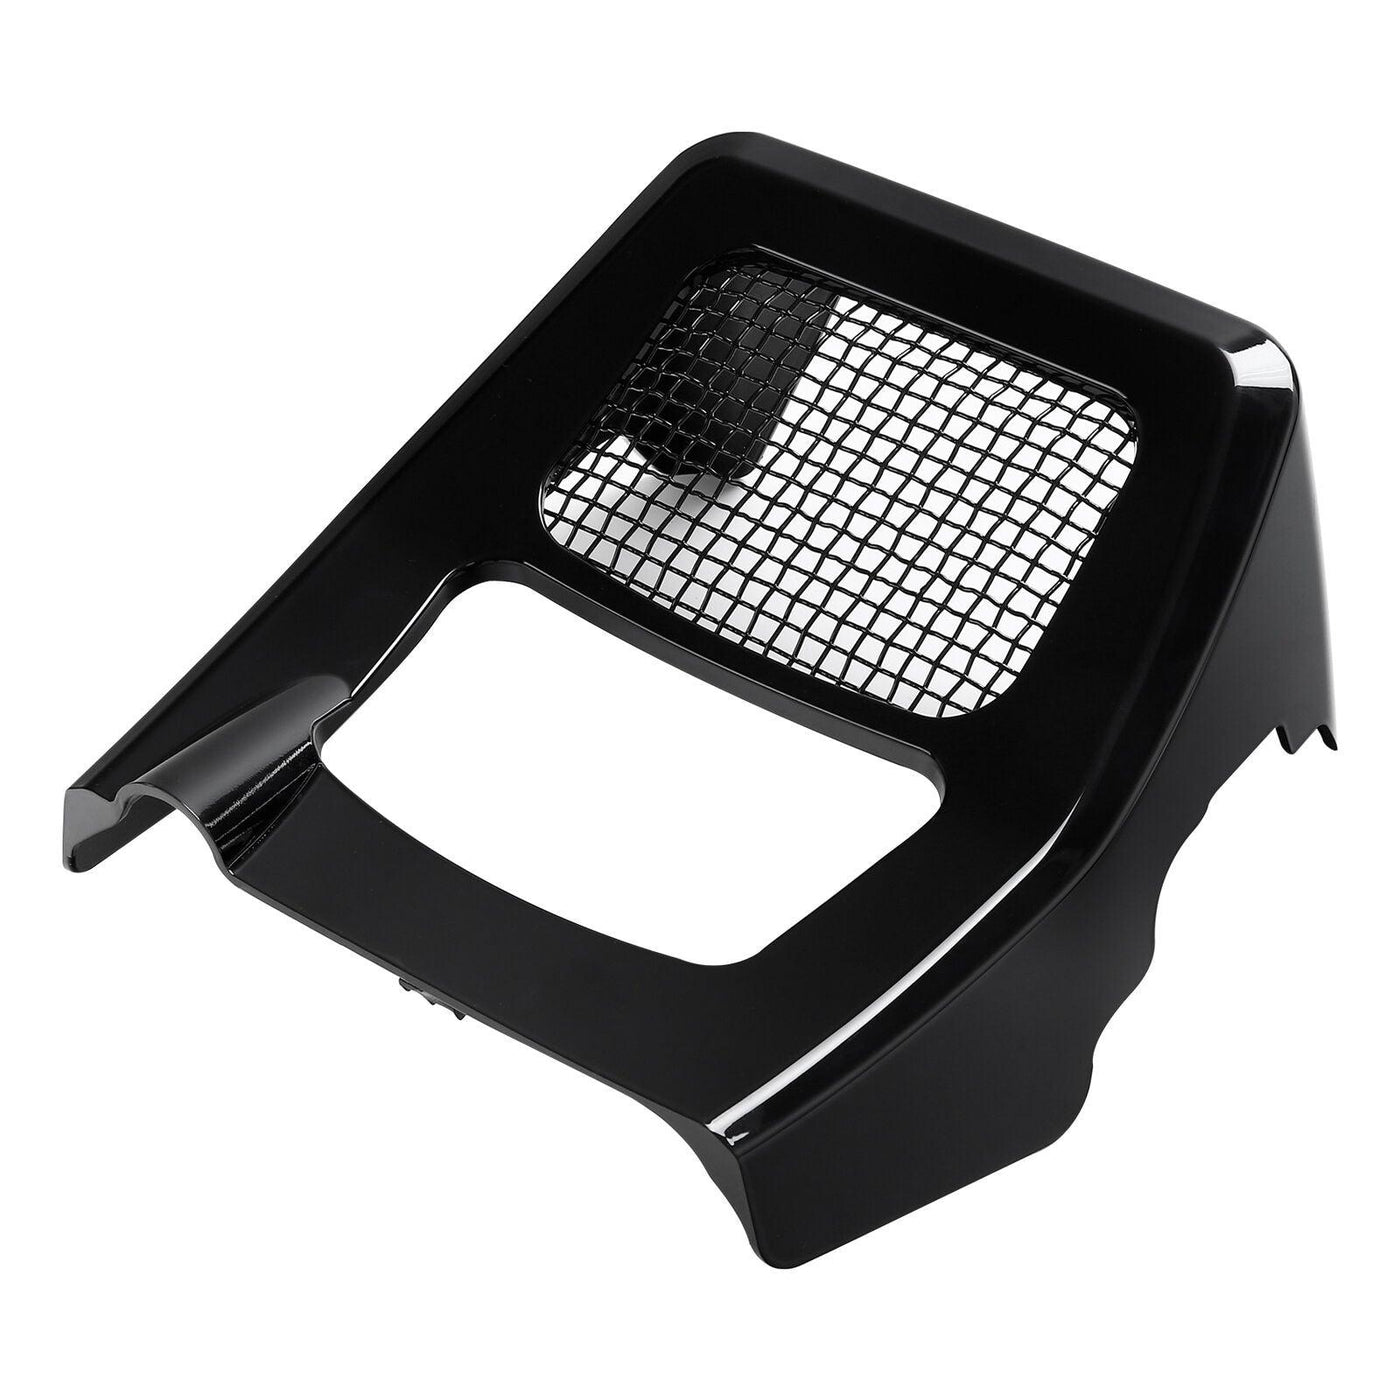 ABS Fairing Spoilers Radiator Cover Fit For Harley Touring Street Glide 17-2022 - Moto Life Products